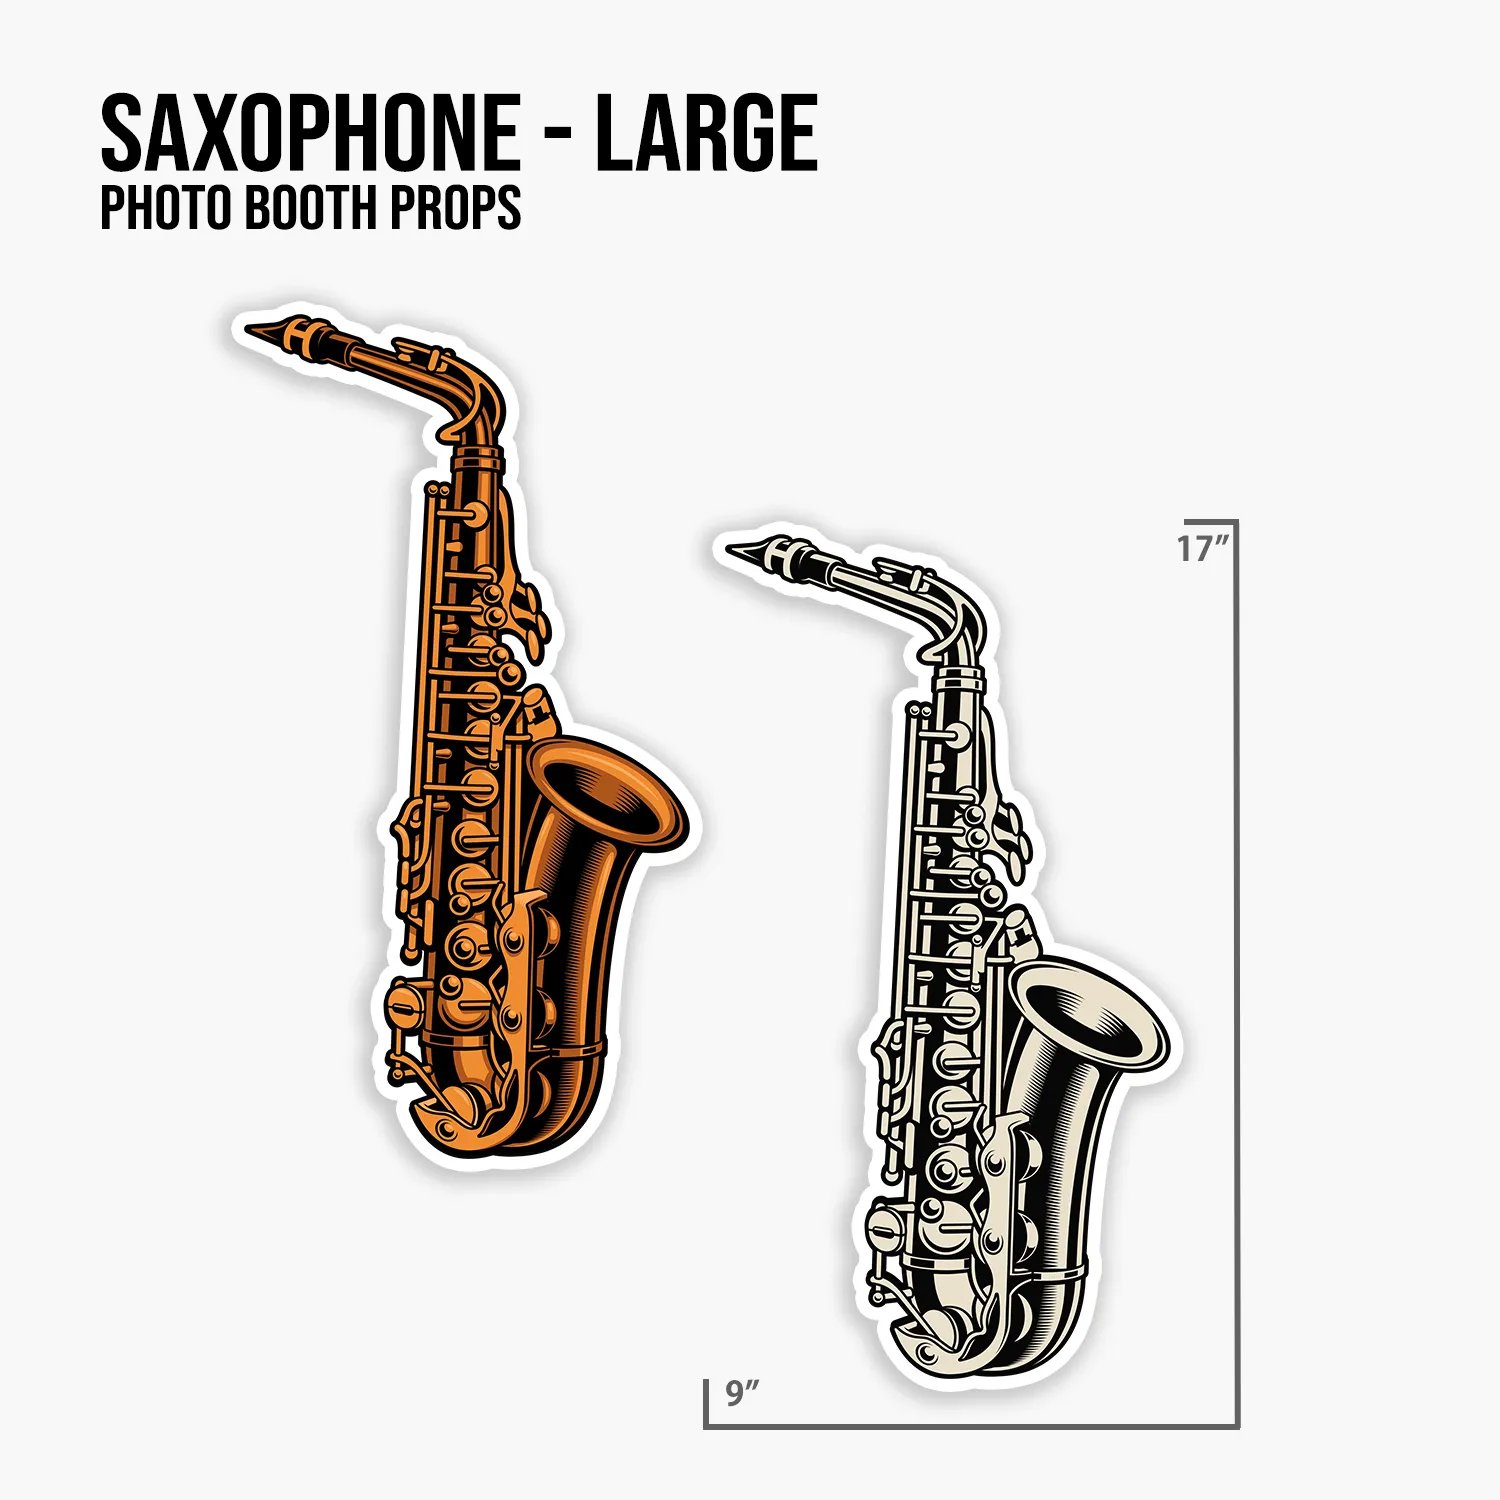 Saxophone-Large-Photo-Booth-Props.jpg